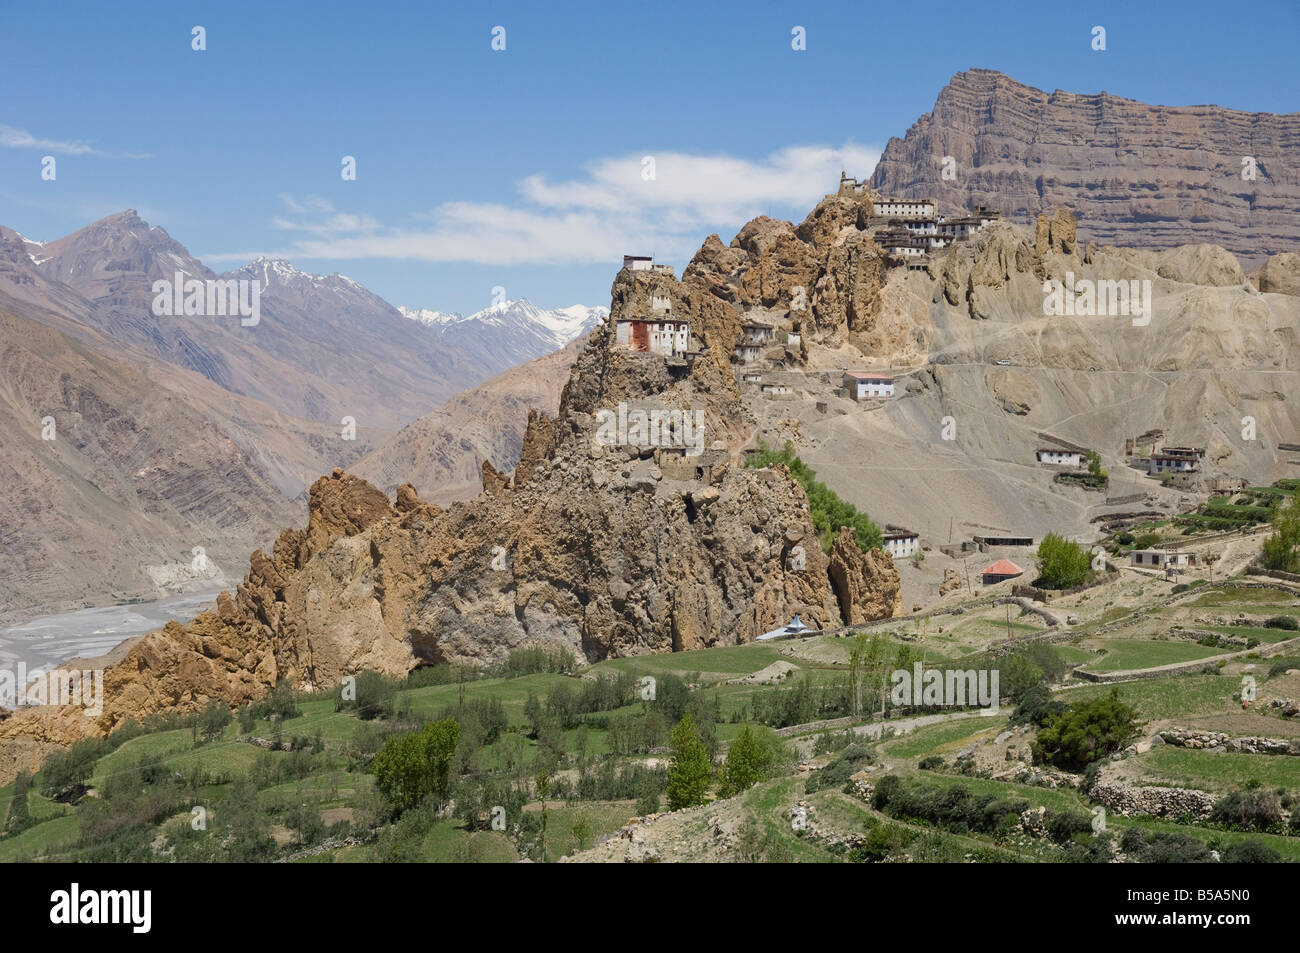 View from afar of Dhankar monastery, and cliff and snowy mountains beyond, Spiti, Himachal Pradesh, India Stock Photo